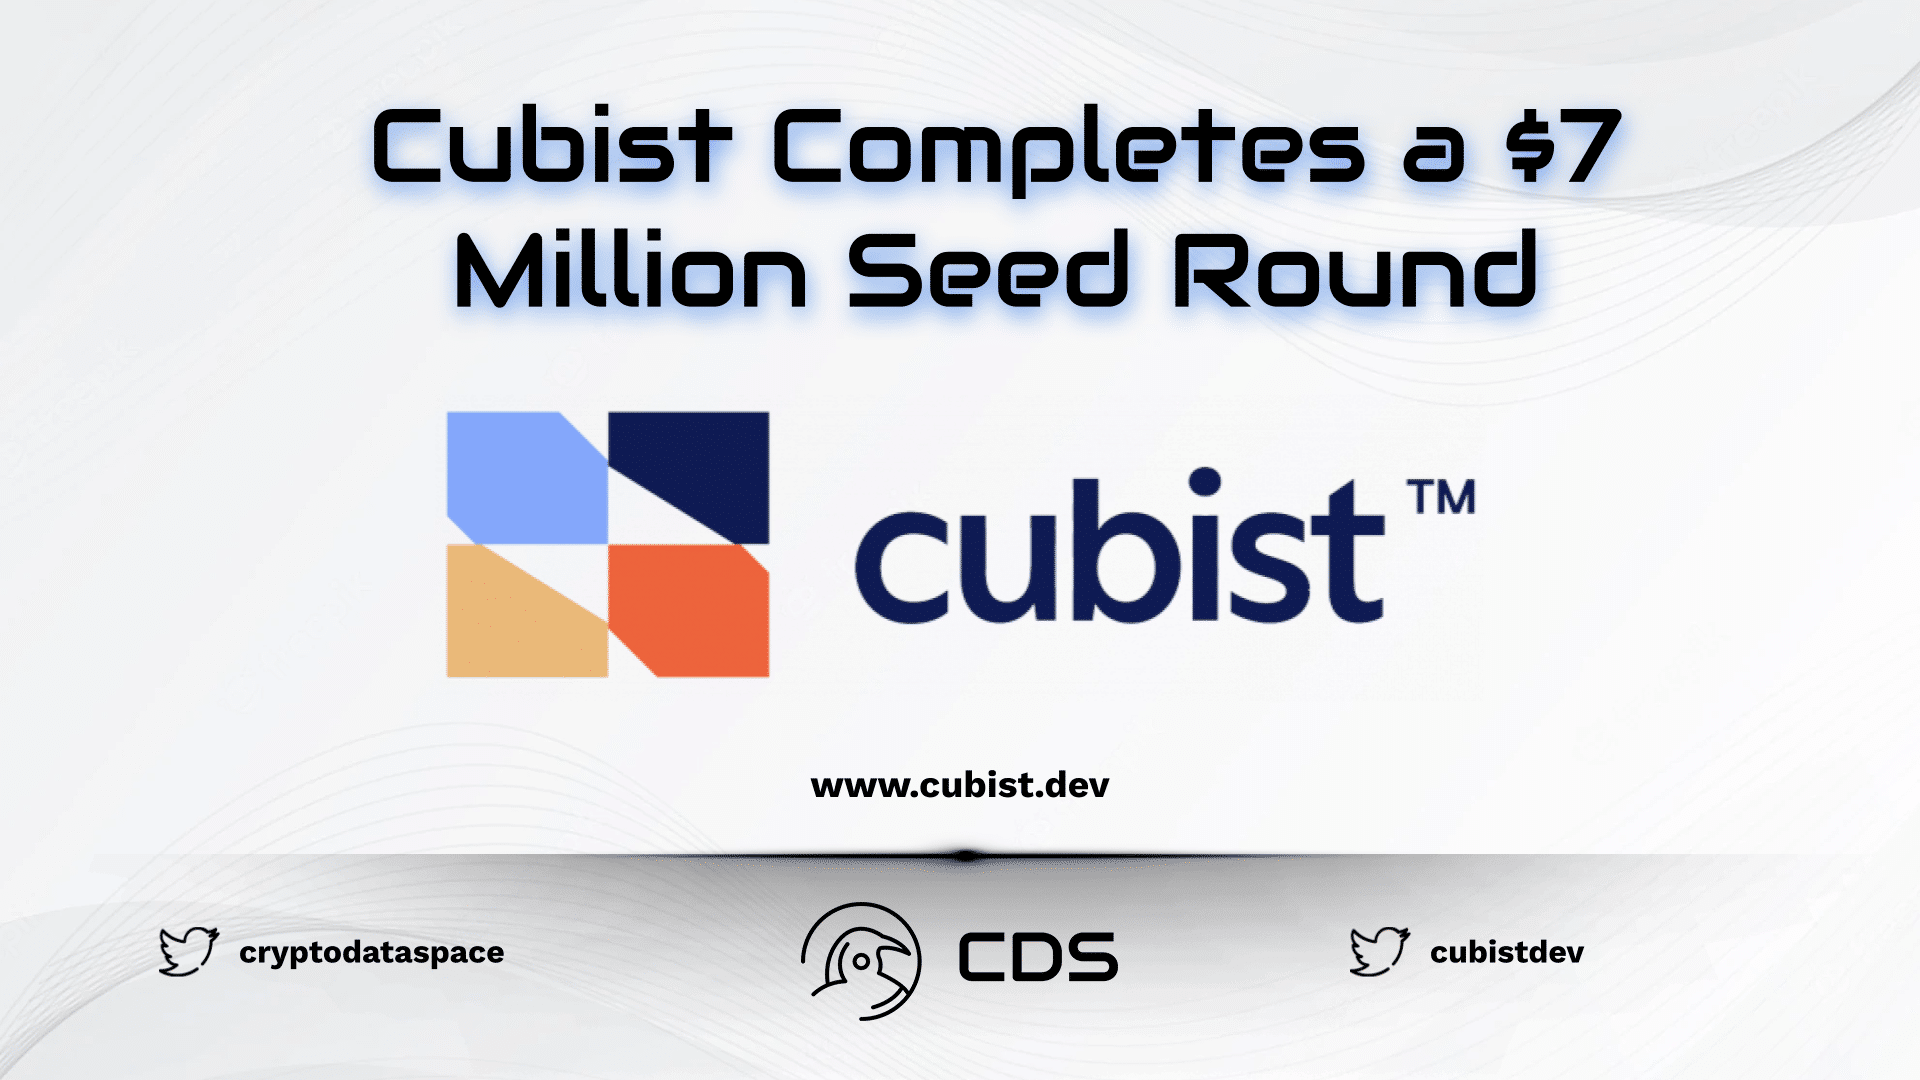 Cubist Completes a $7 Million Seed Round